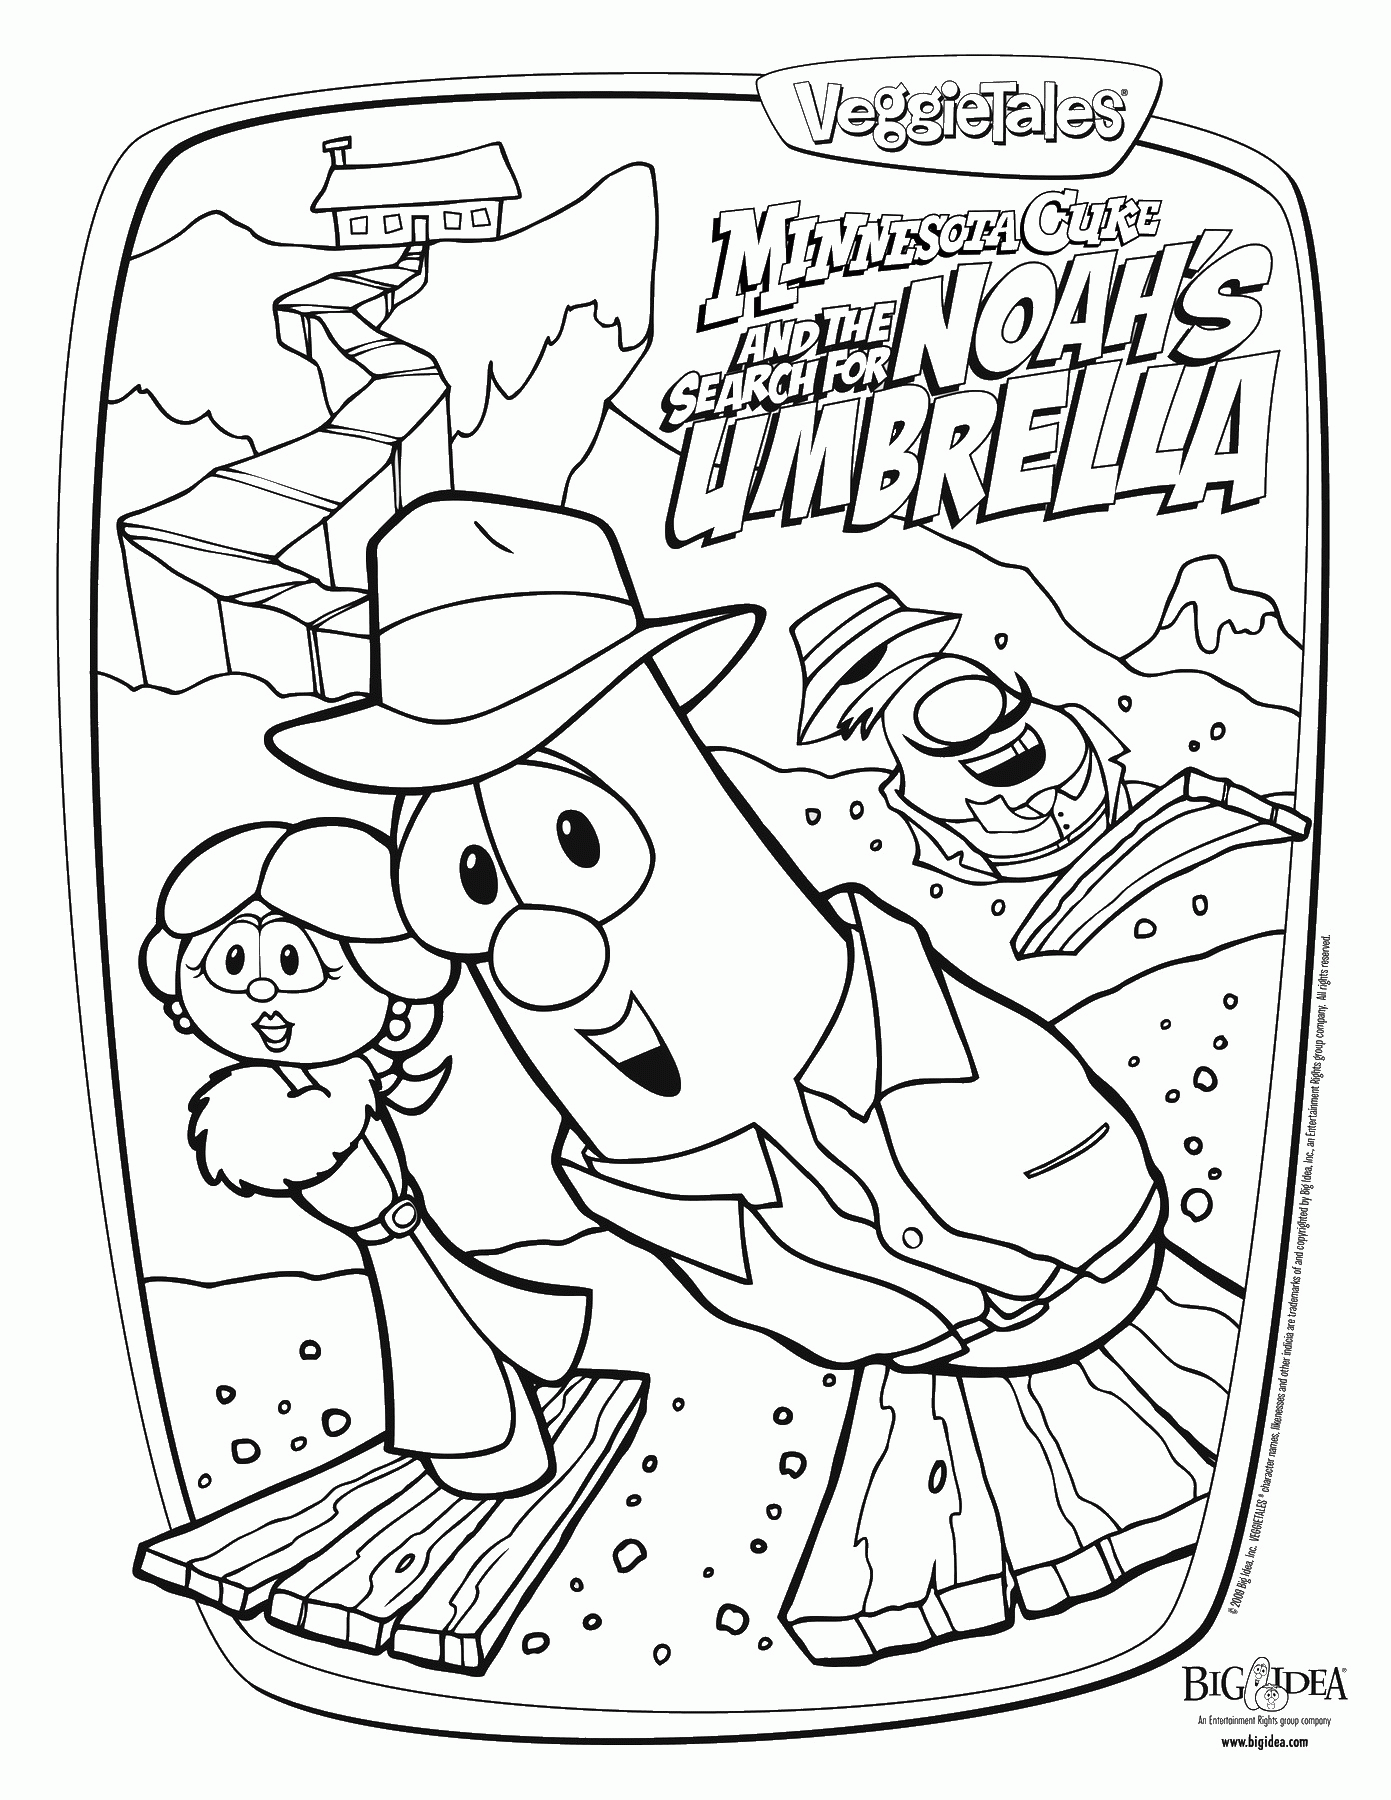 free-printable-veggie-tales-coloring-pages-for-kids